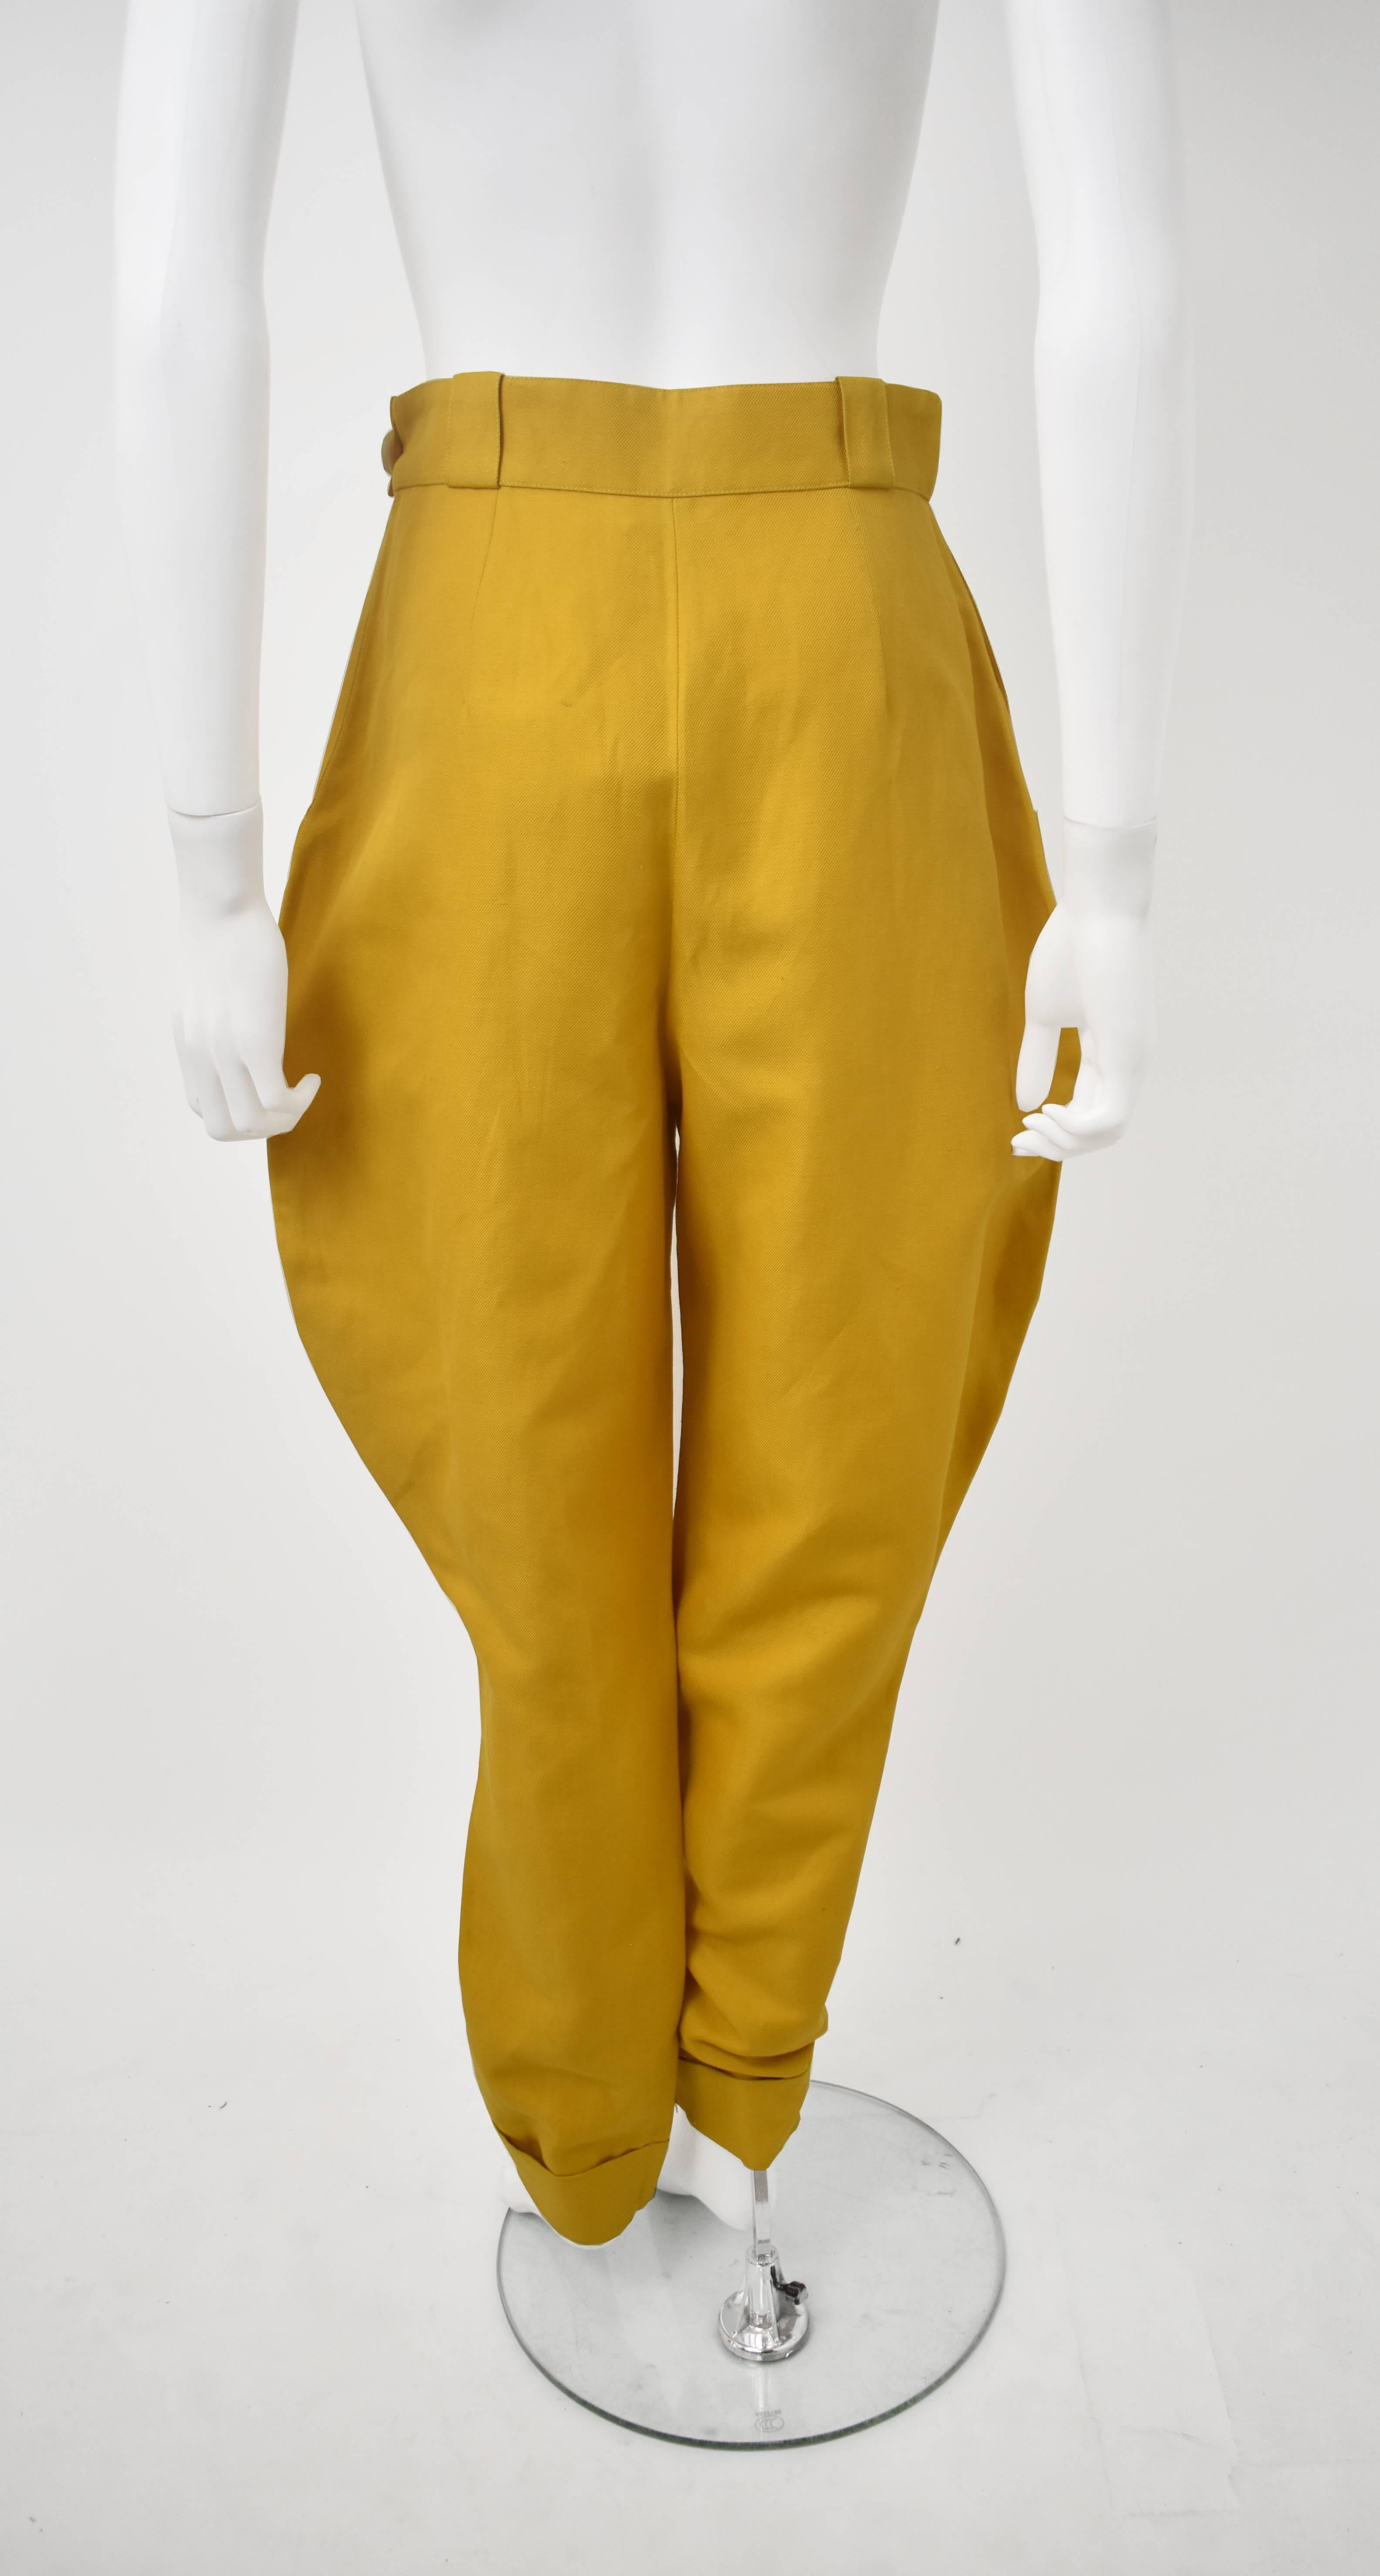 Women's Hermes Mustard Yellow Jodhpur Trousers with Eyelet and Leather Tie Details For Sale